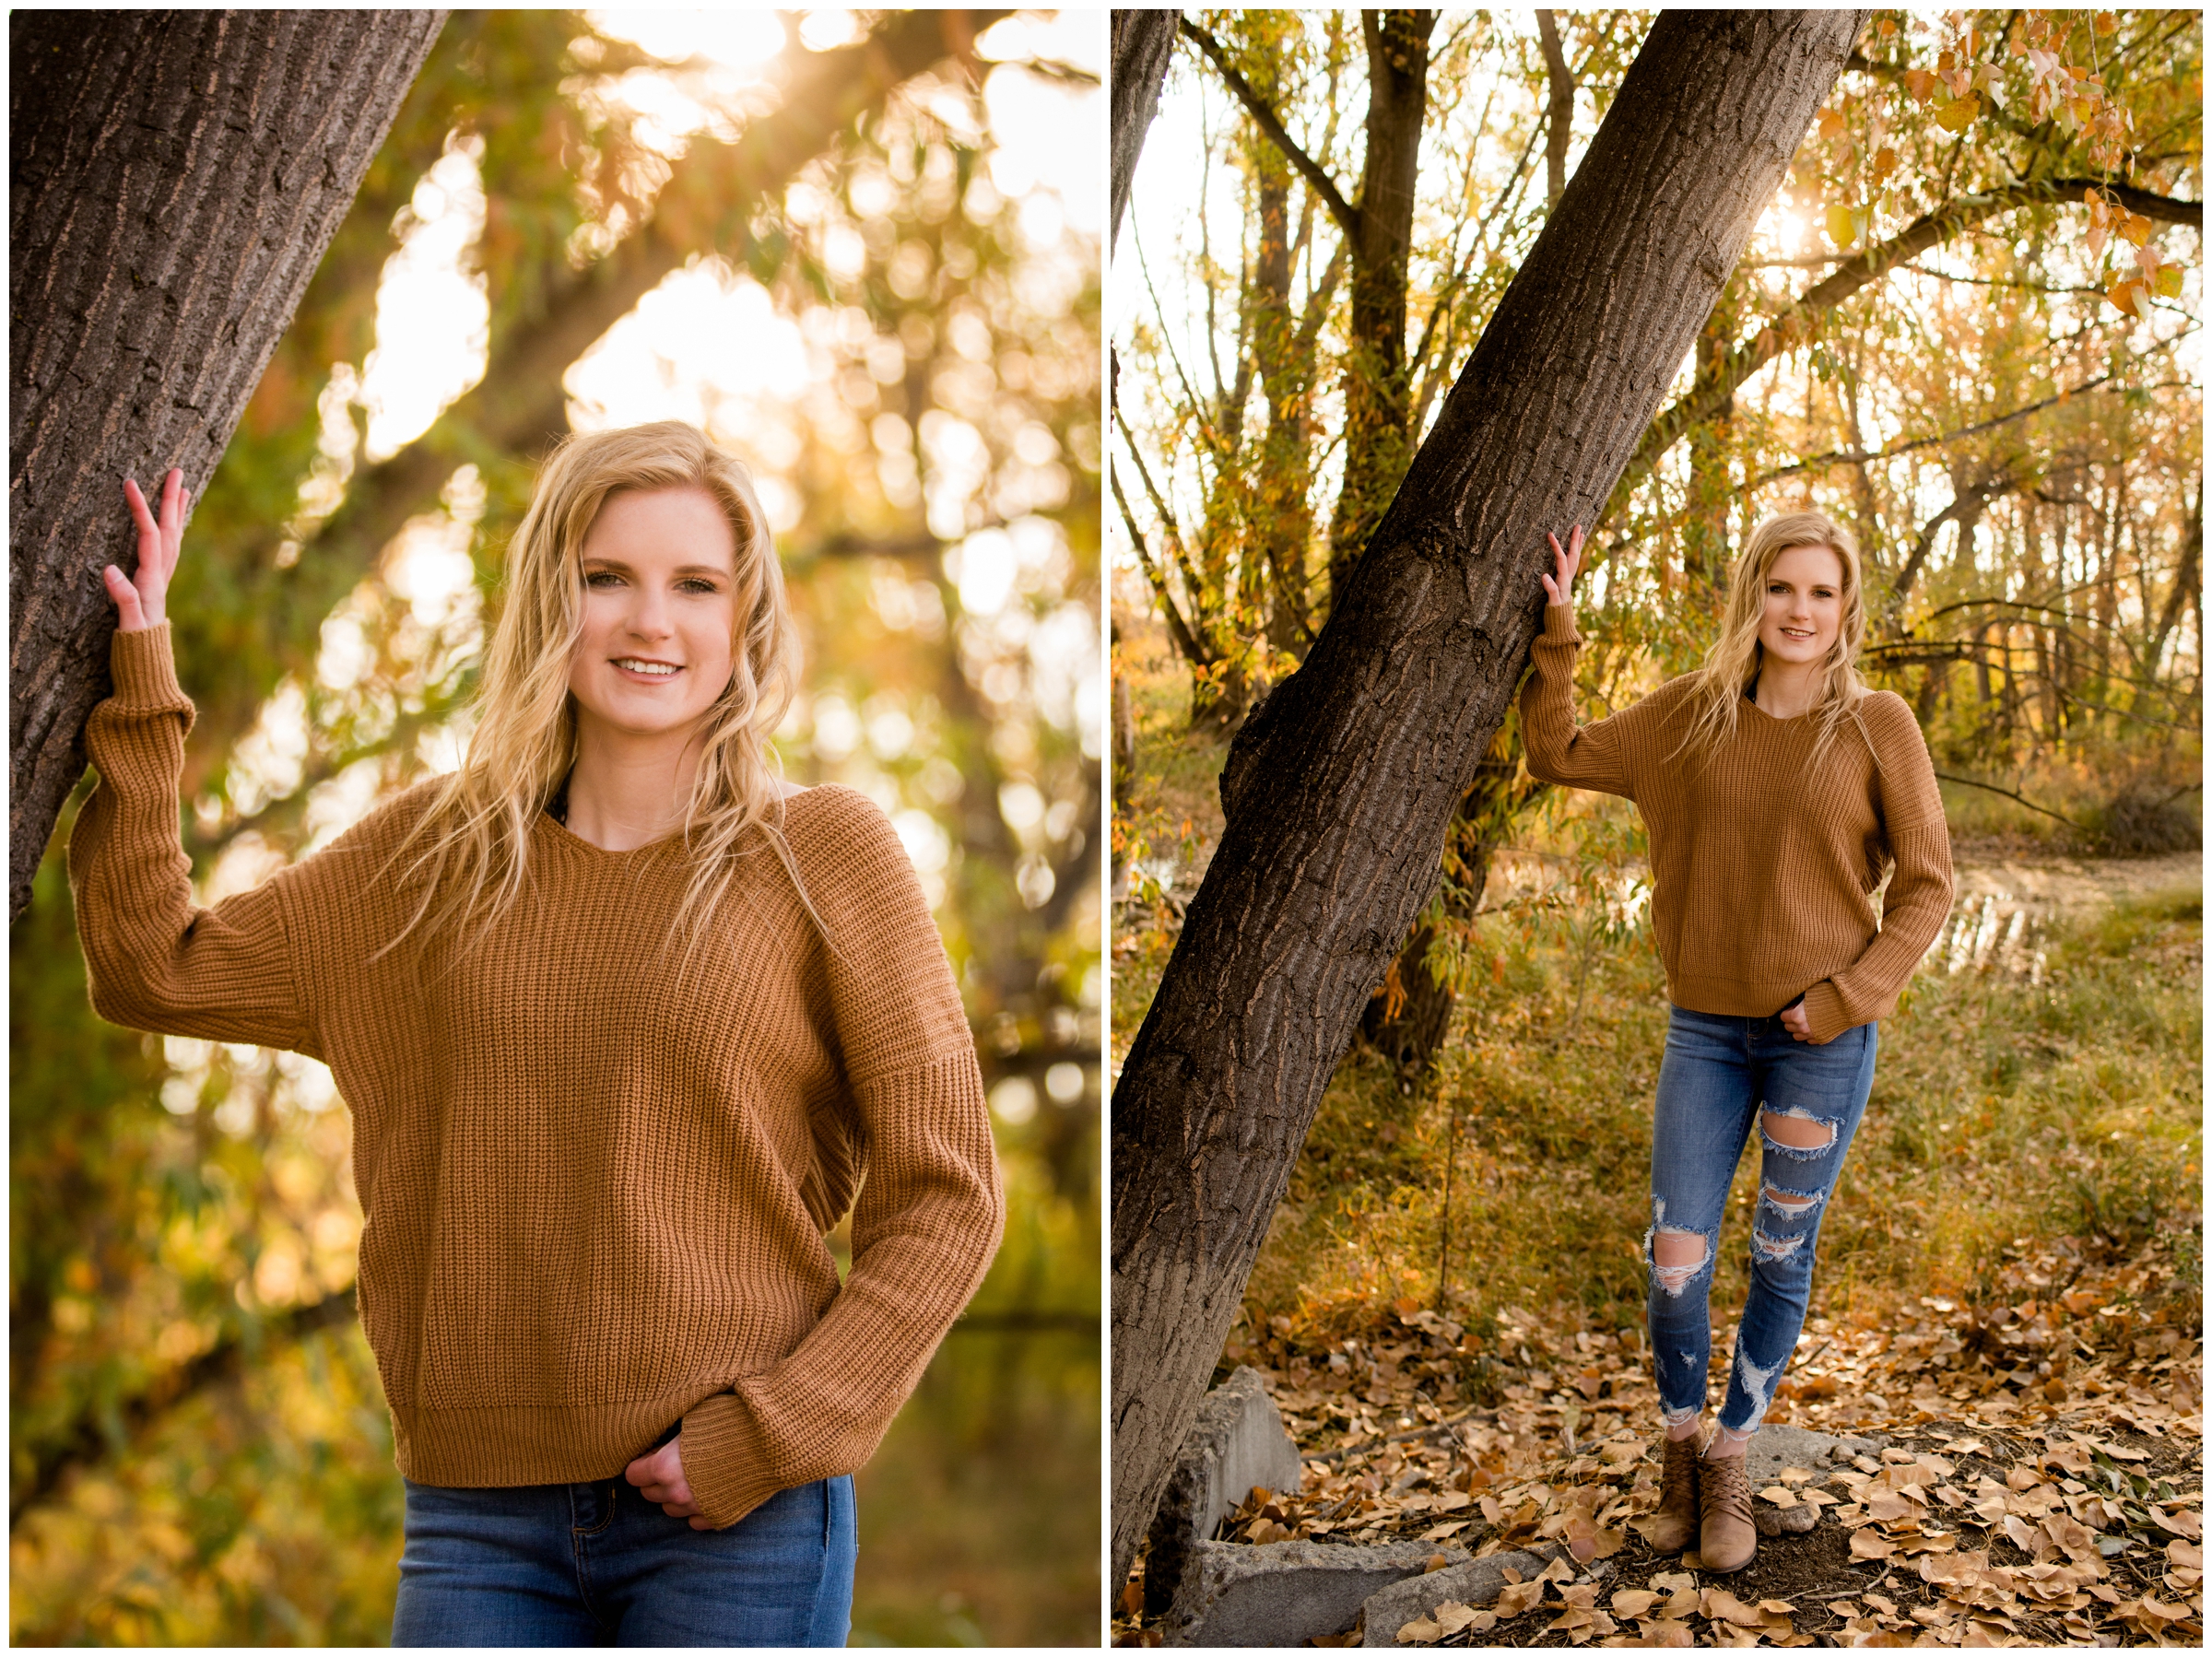 Teen girl leaning against tree with fall foliage in background during Boulder County portraits 